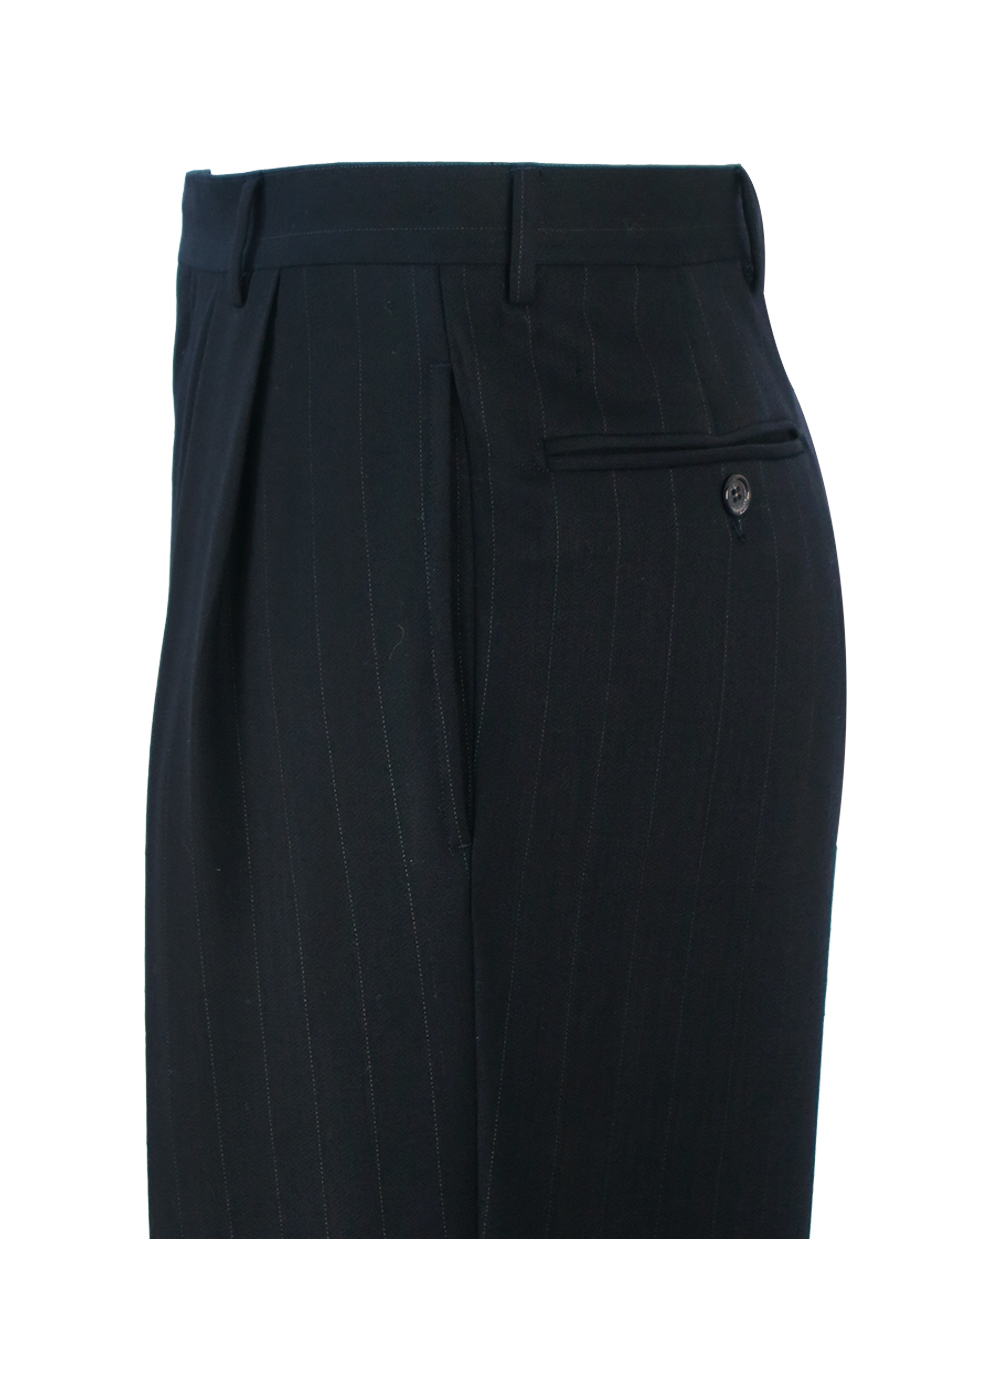 Black Fine Pinstripe Wool Trousers with Pleat Front & Turn Ups - 31 ...